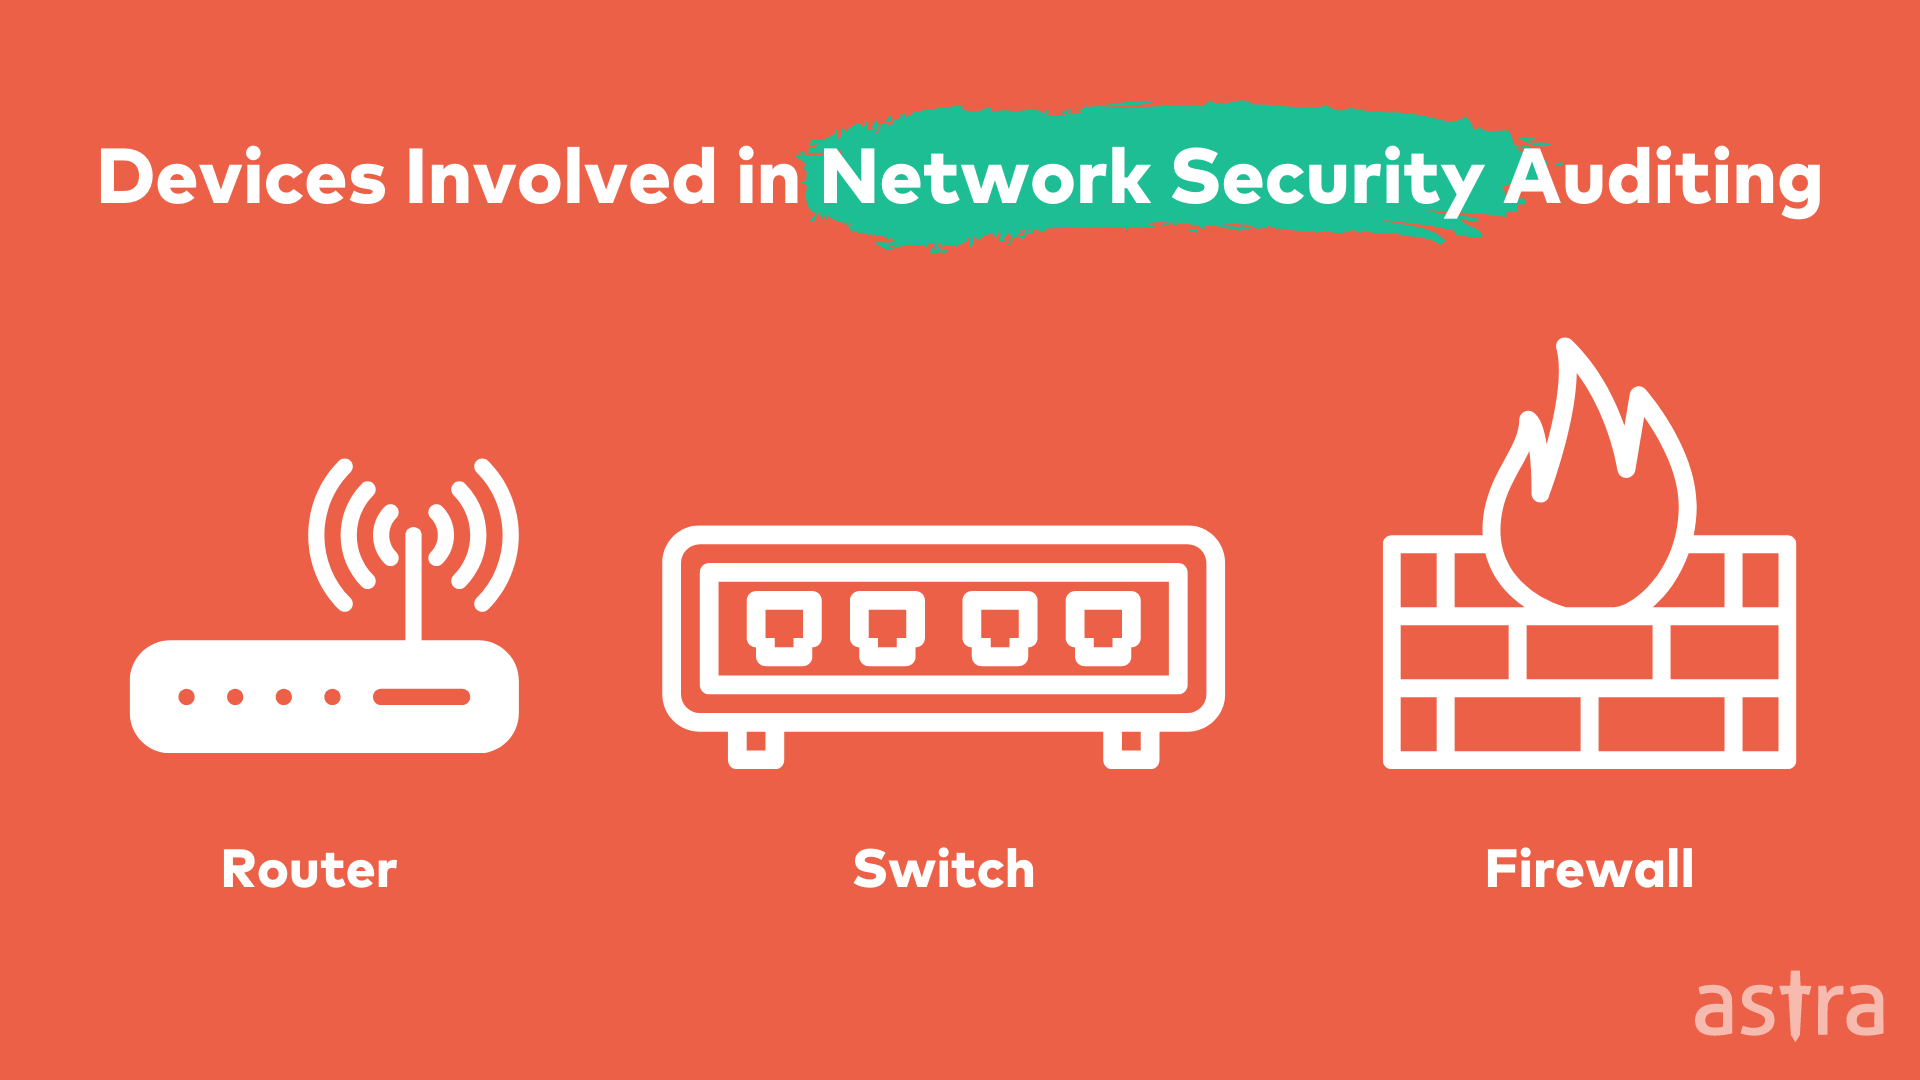 Image: Devices involved in Network Security Audit